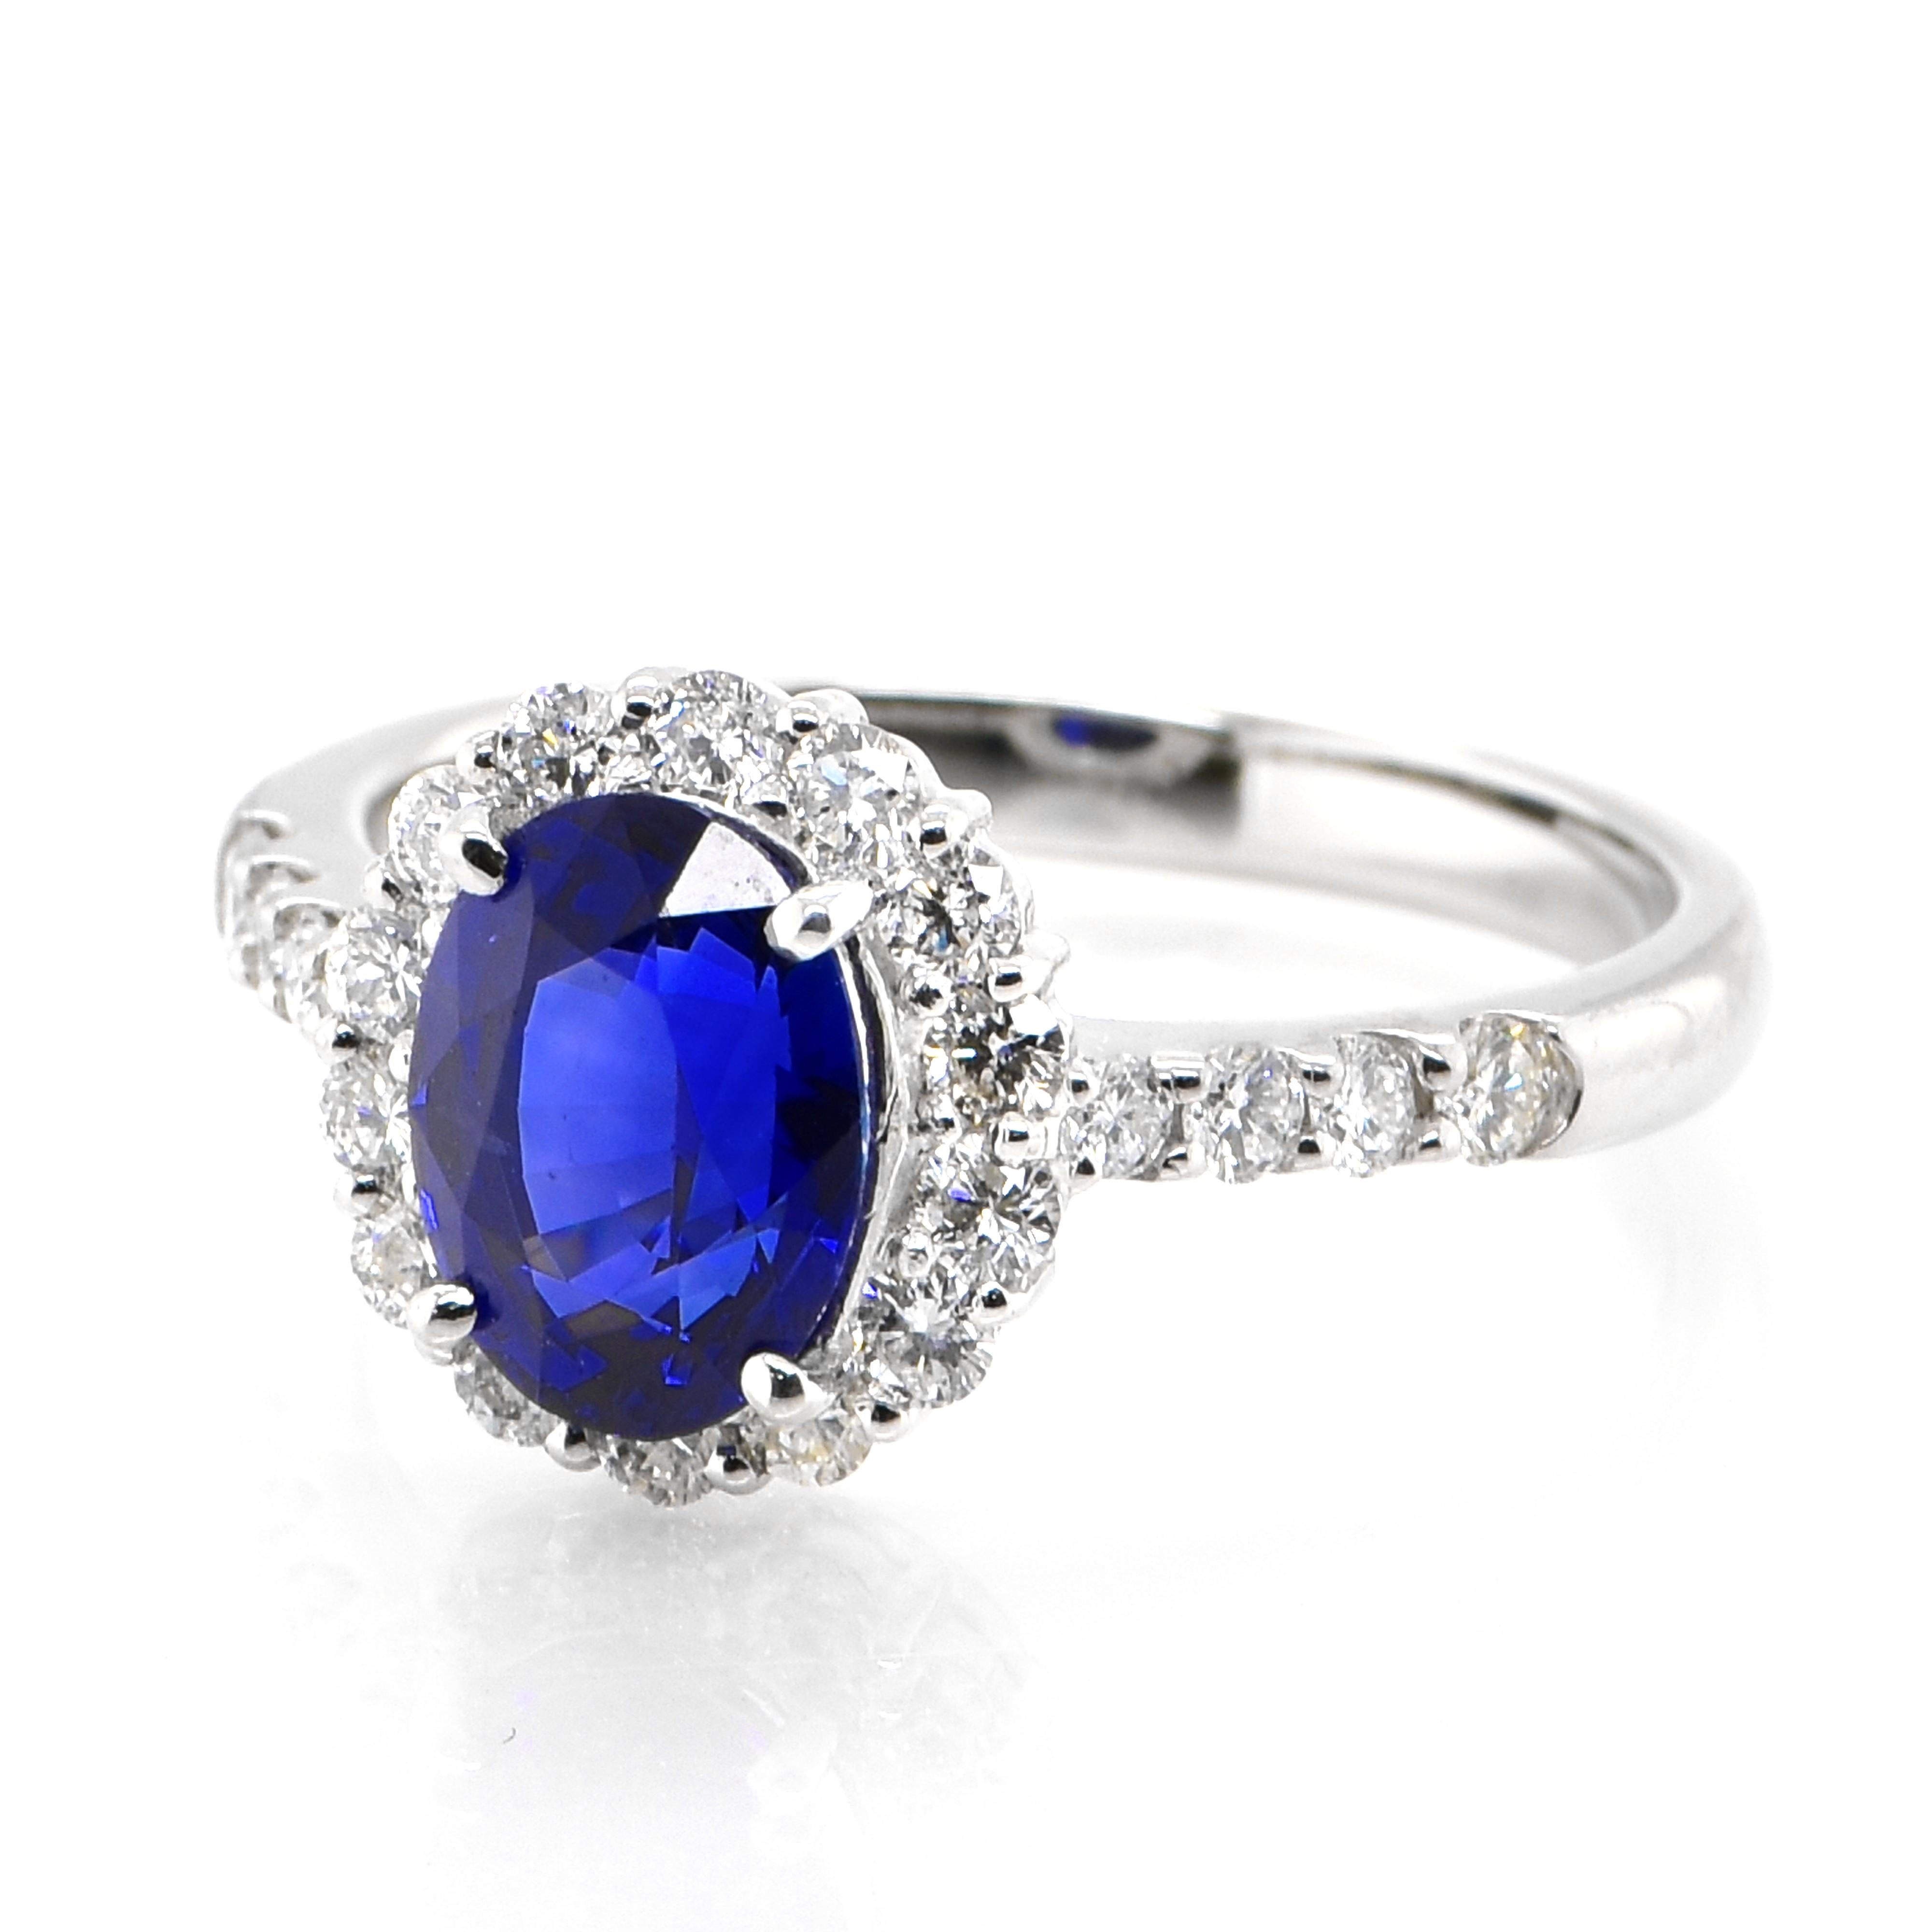 A beautiful ring featuring 1.92 Carat Natural Royal Blue Sapphire and 0.55 Carats Diamond Accents set in Platinum. Sapphires have extraordinary durability - they excel in hardness as well as toughness and durability making them very popular in